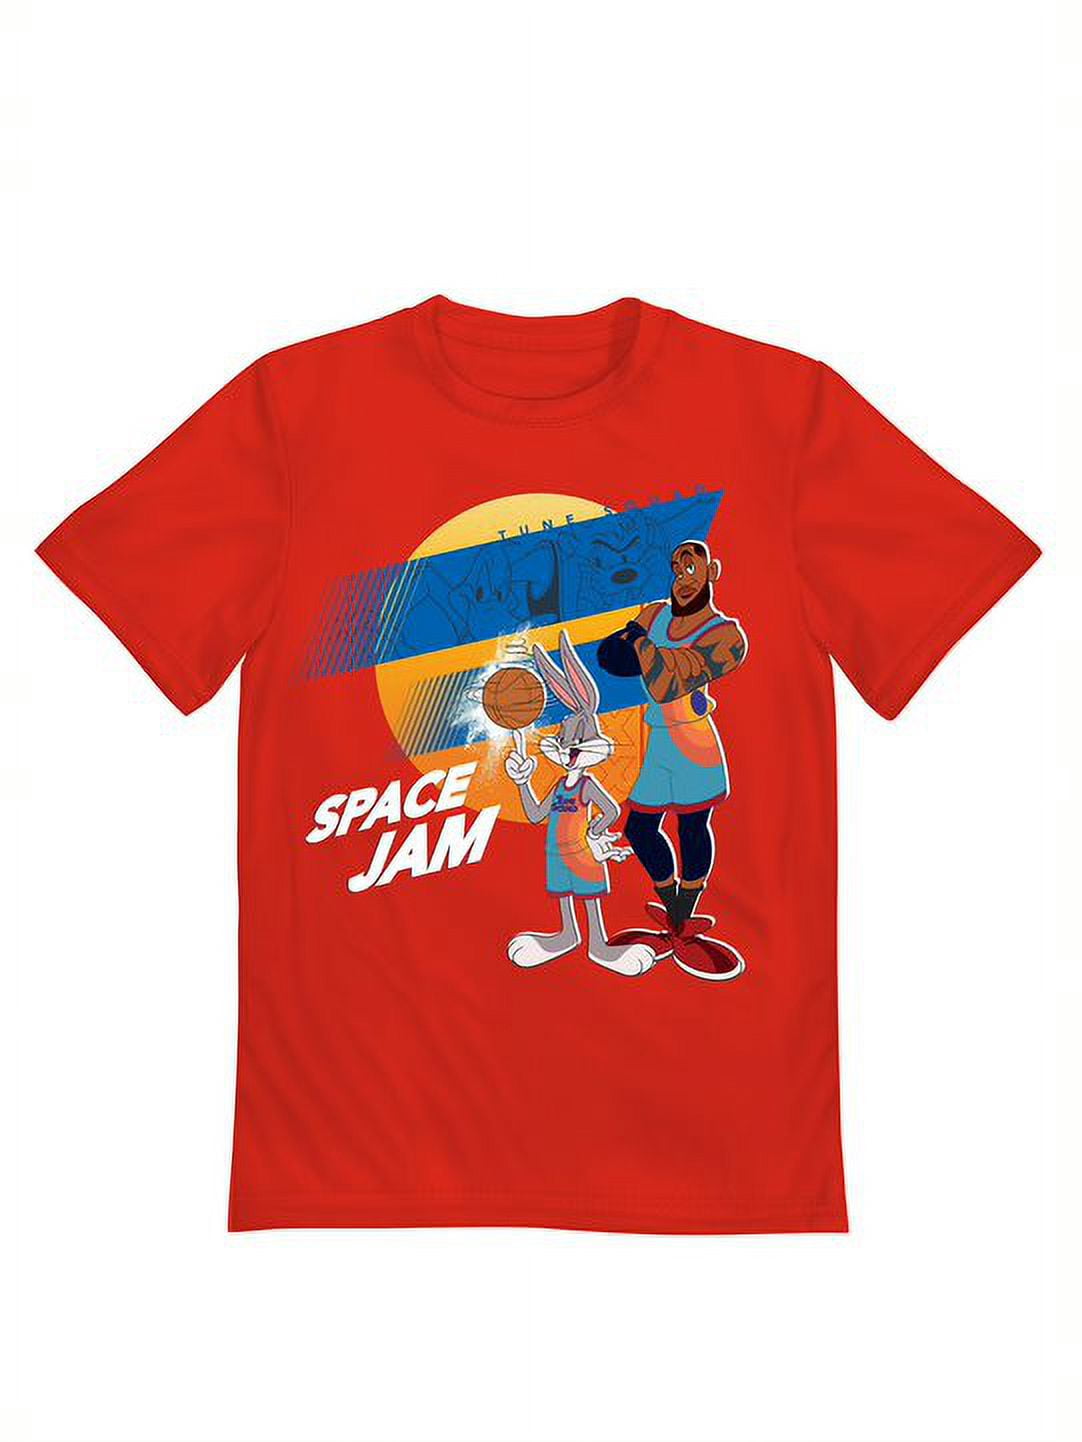 Slam LeBron James Bugs Bunny 'bout that time shirt, hoodie, sweater,  longsleeve and V-neck T-shirt